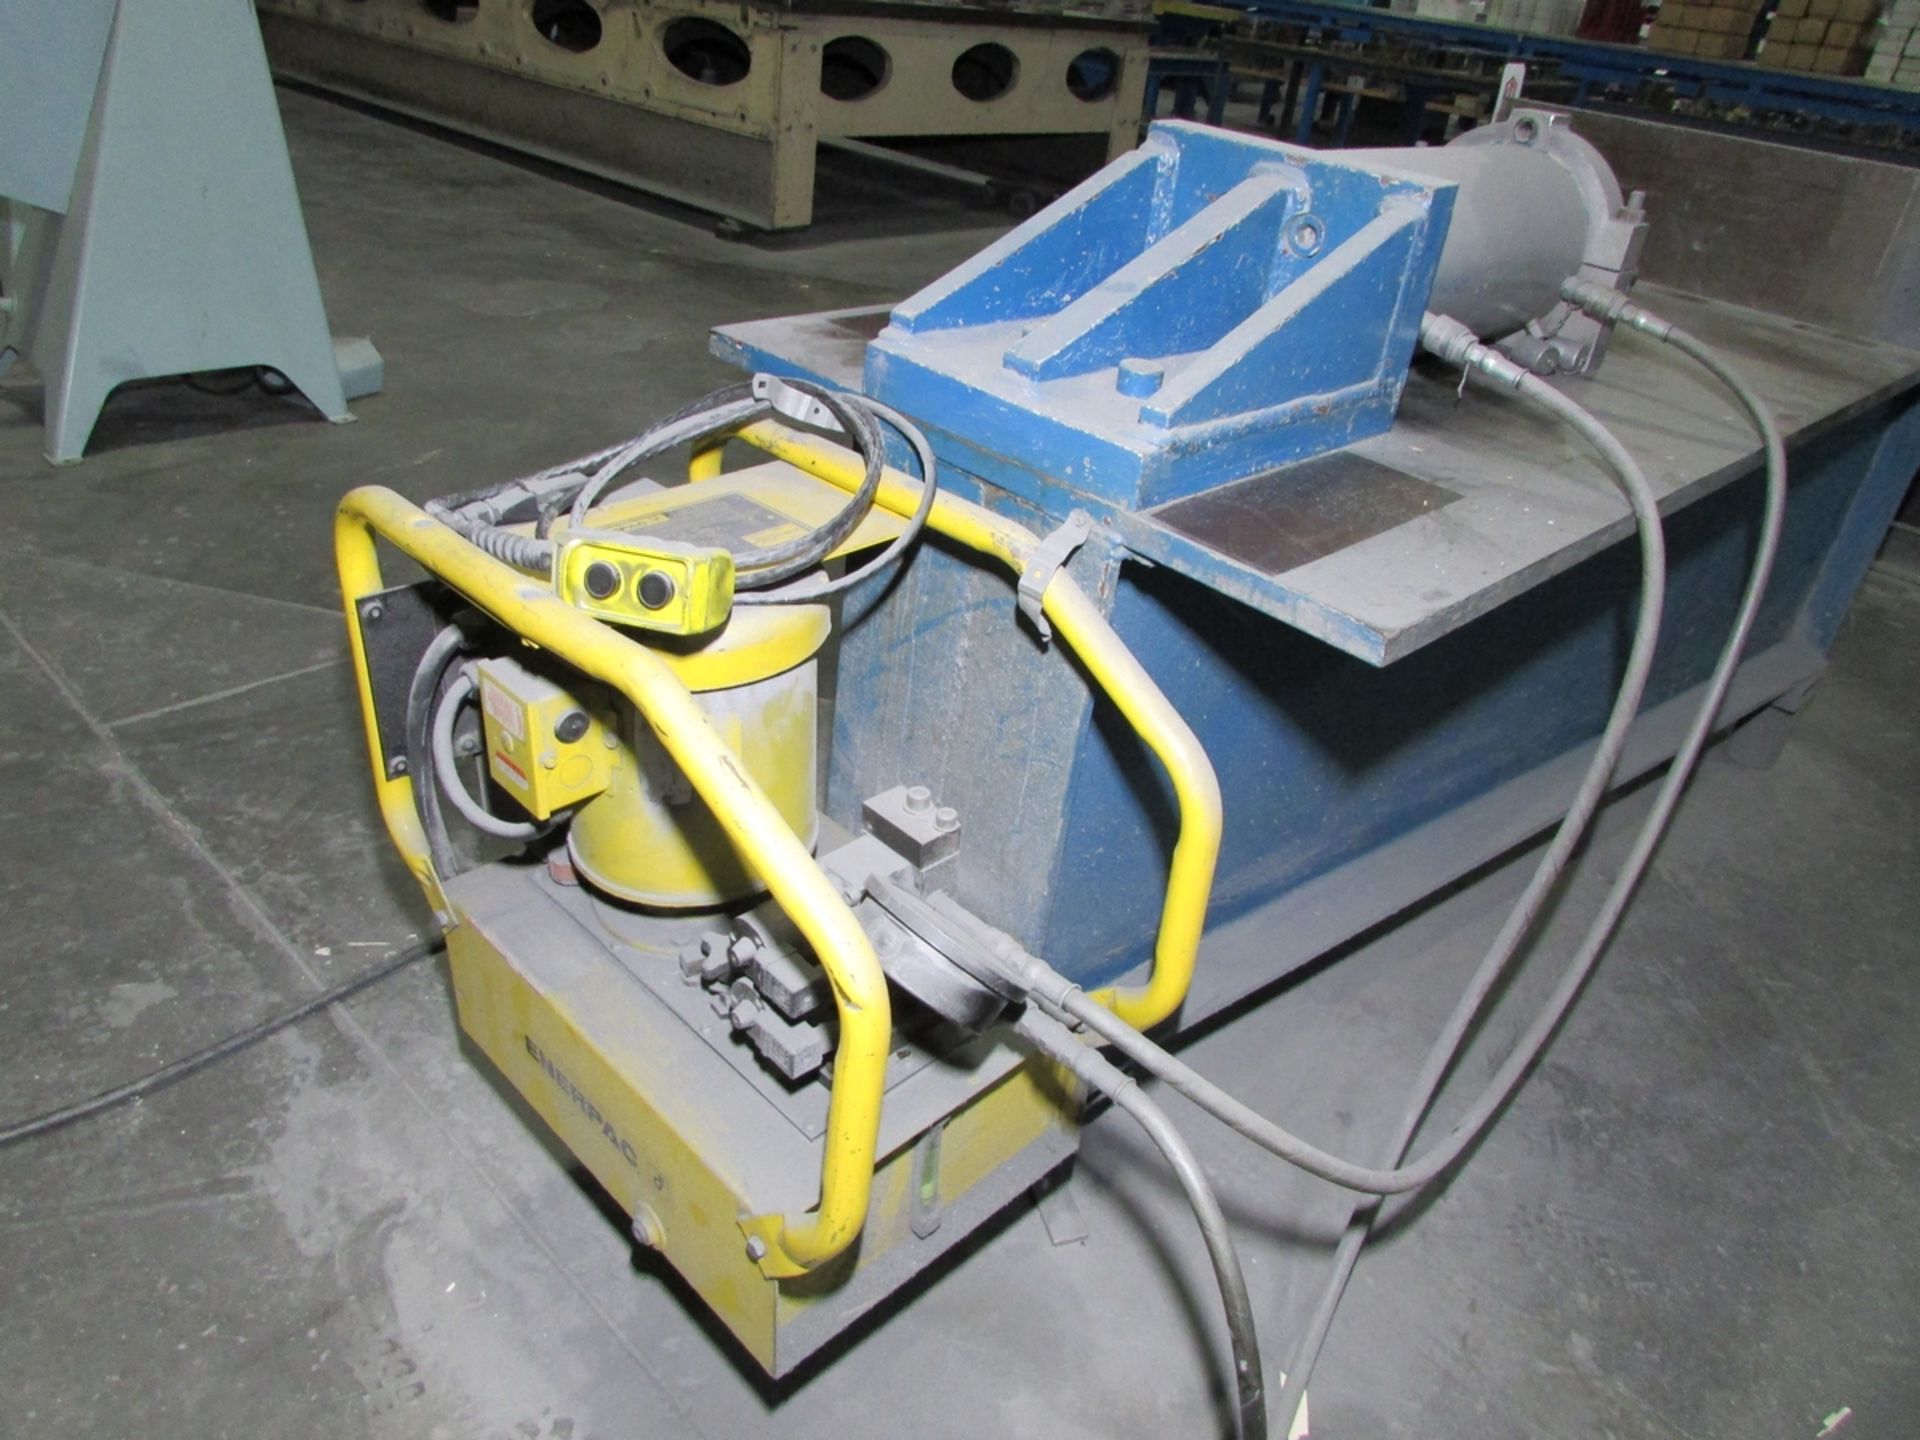 HORIZONTAL HYDRAULIC STRAIGHTENING PRESS, 30" X 9" ANGLE PLATE, 80" X 30" TABLE, ENERPAC GPER5320J - Image 7 of 12